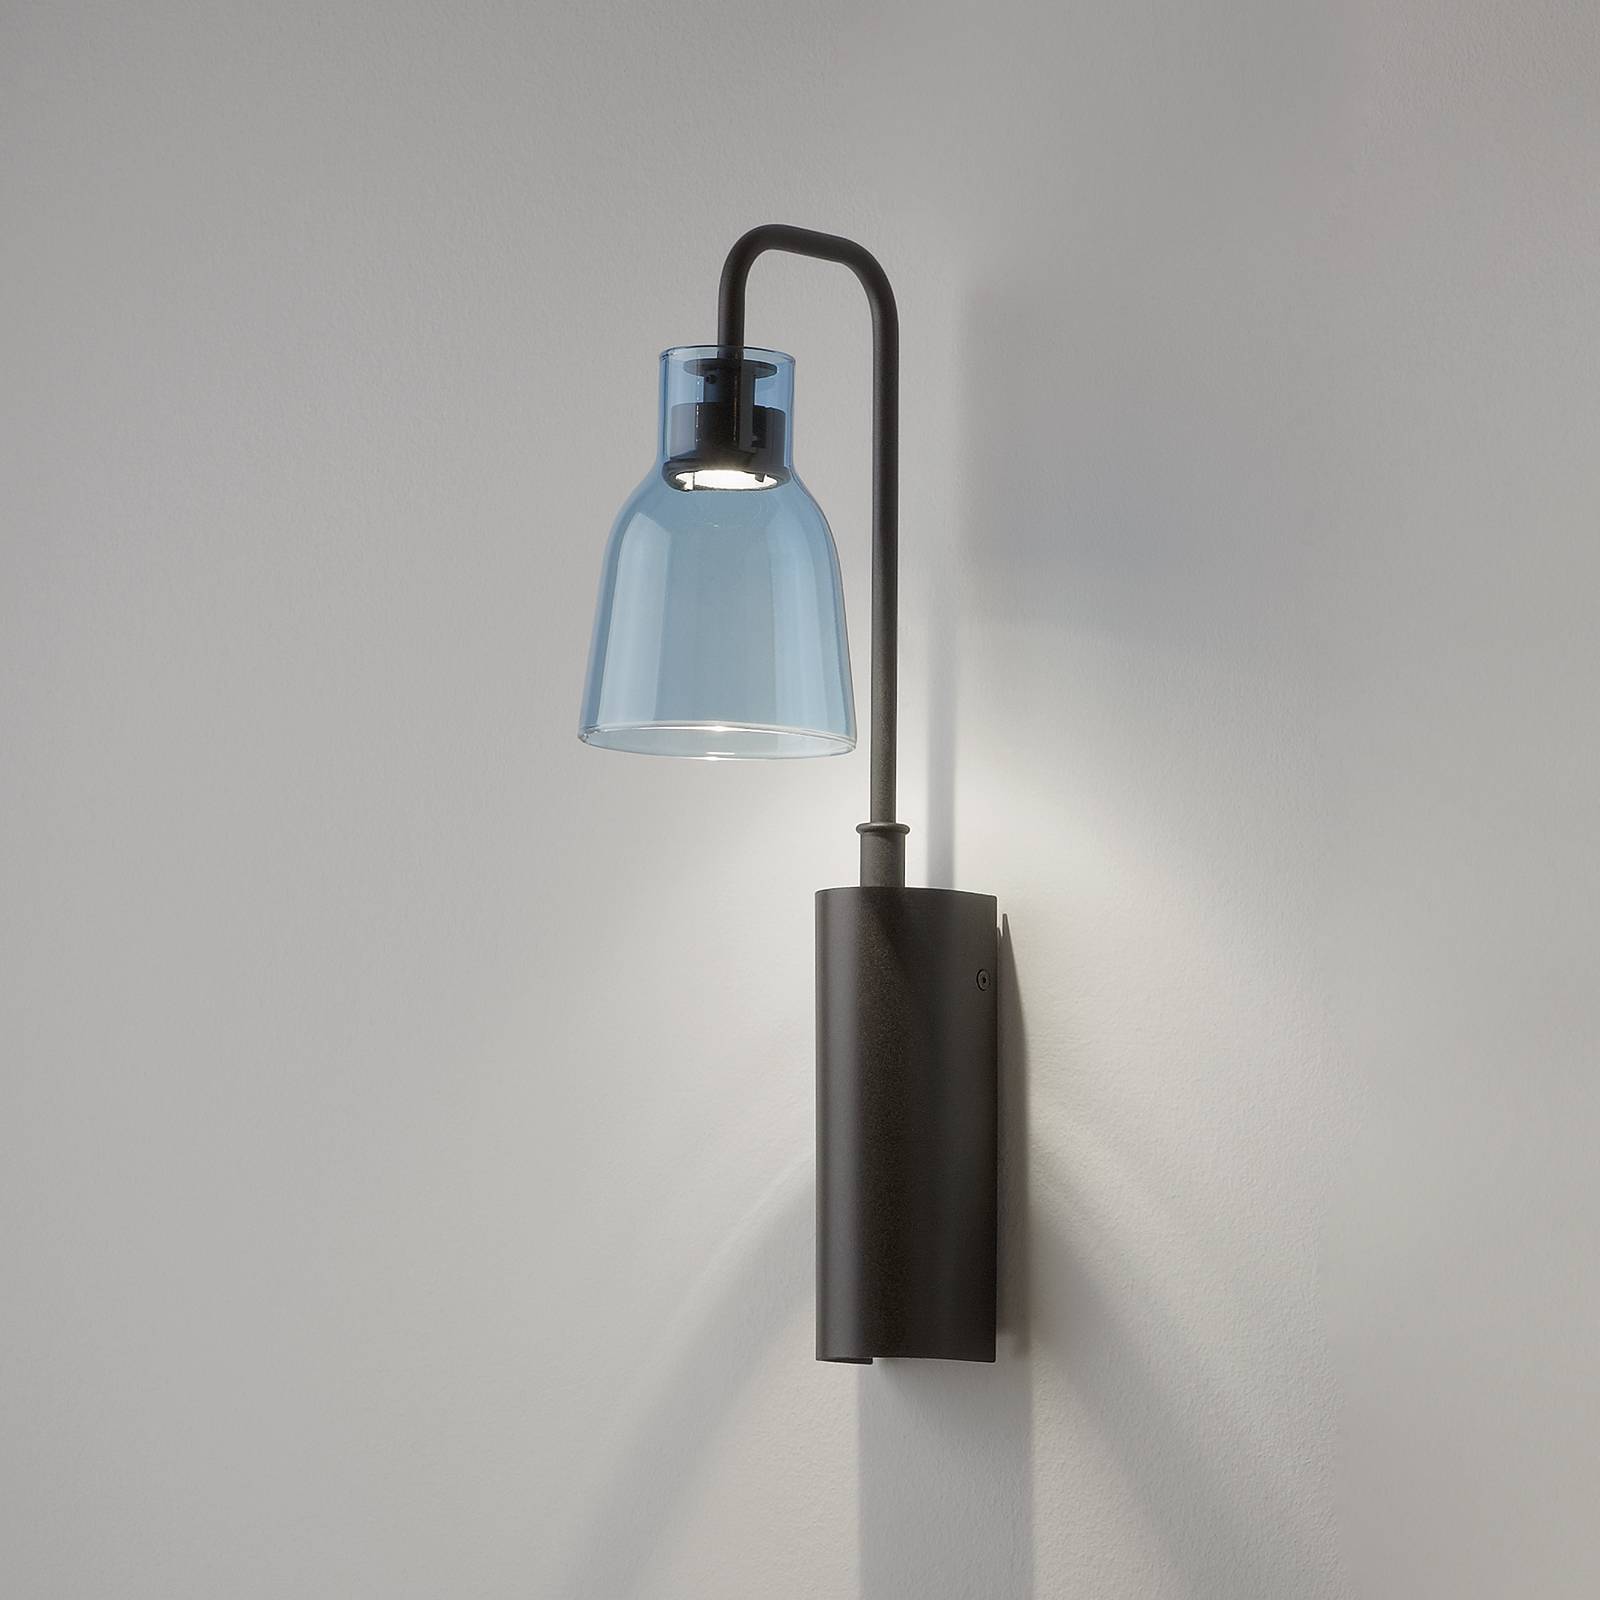 Photos - Chandelier / Lamp BOVER Drip A/02 LED wall light, blue 